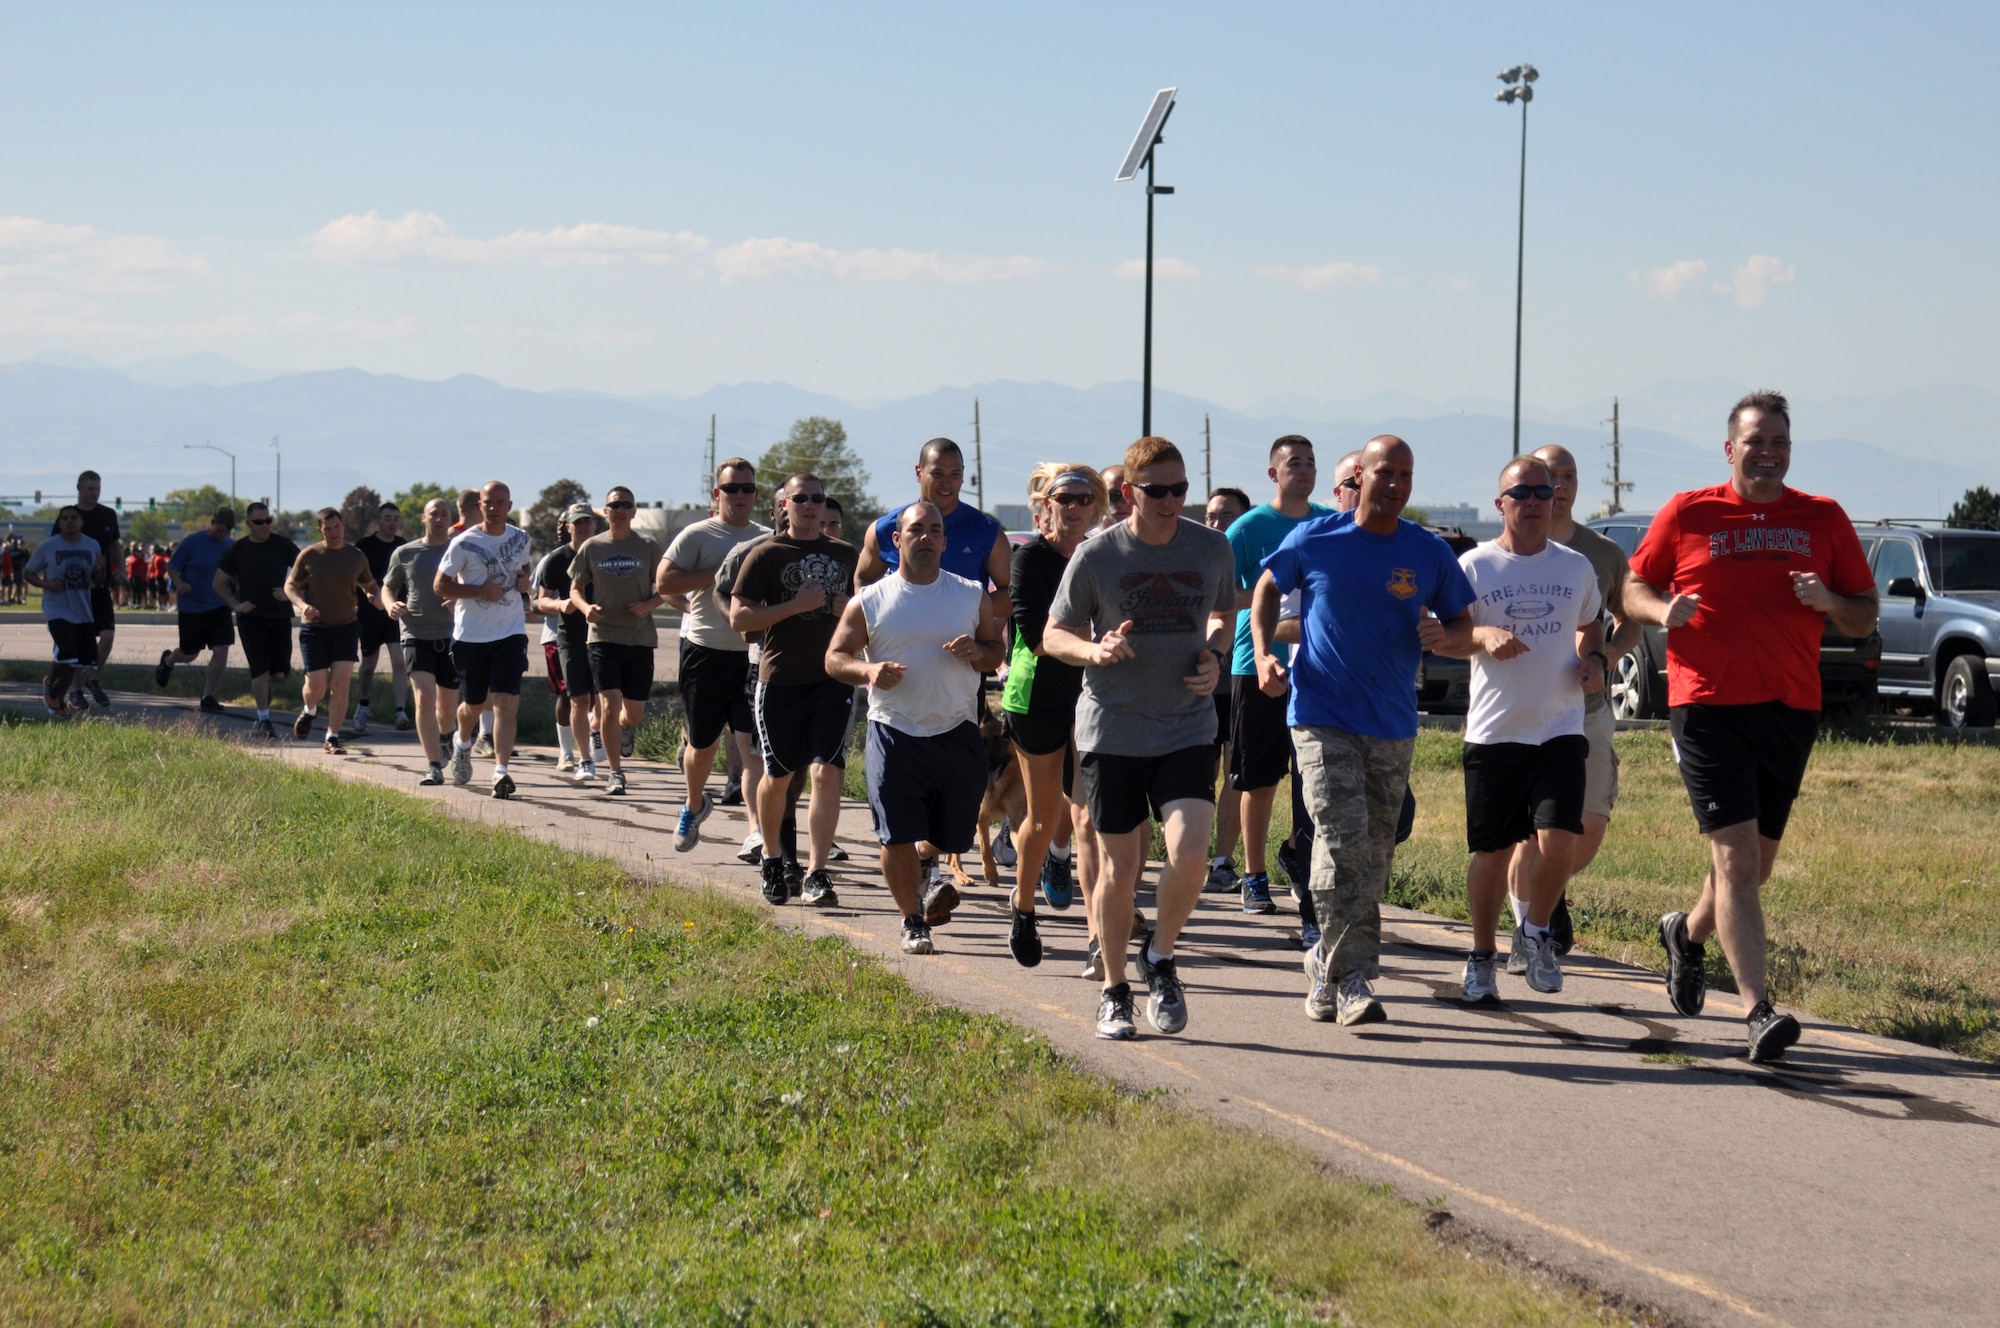 Team Buckley members take off at the beginning of WARFIT Sept. 25, 2014, on Buckley Air Force Base, Colo. The 460th Civil Engineer Squadron hosted the September WARFIT, which consisted of a 5K run and a mud obstacle course. WARFIT is a way for the 460th Space Wing and base partner units to get together and stay physically fit. (U.S. Air Force photo by Tech. Sgt. Robert Hazelett/Released)